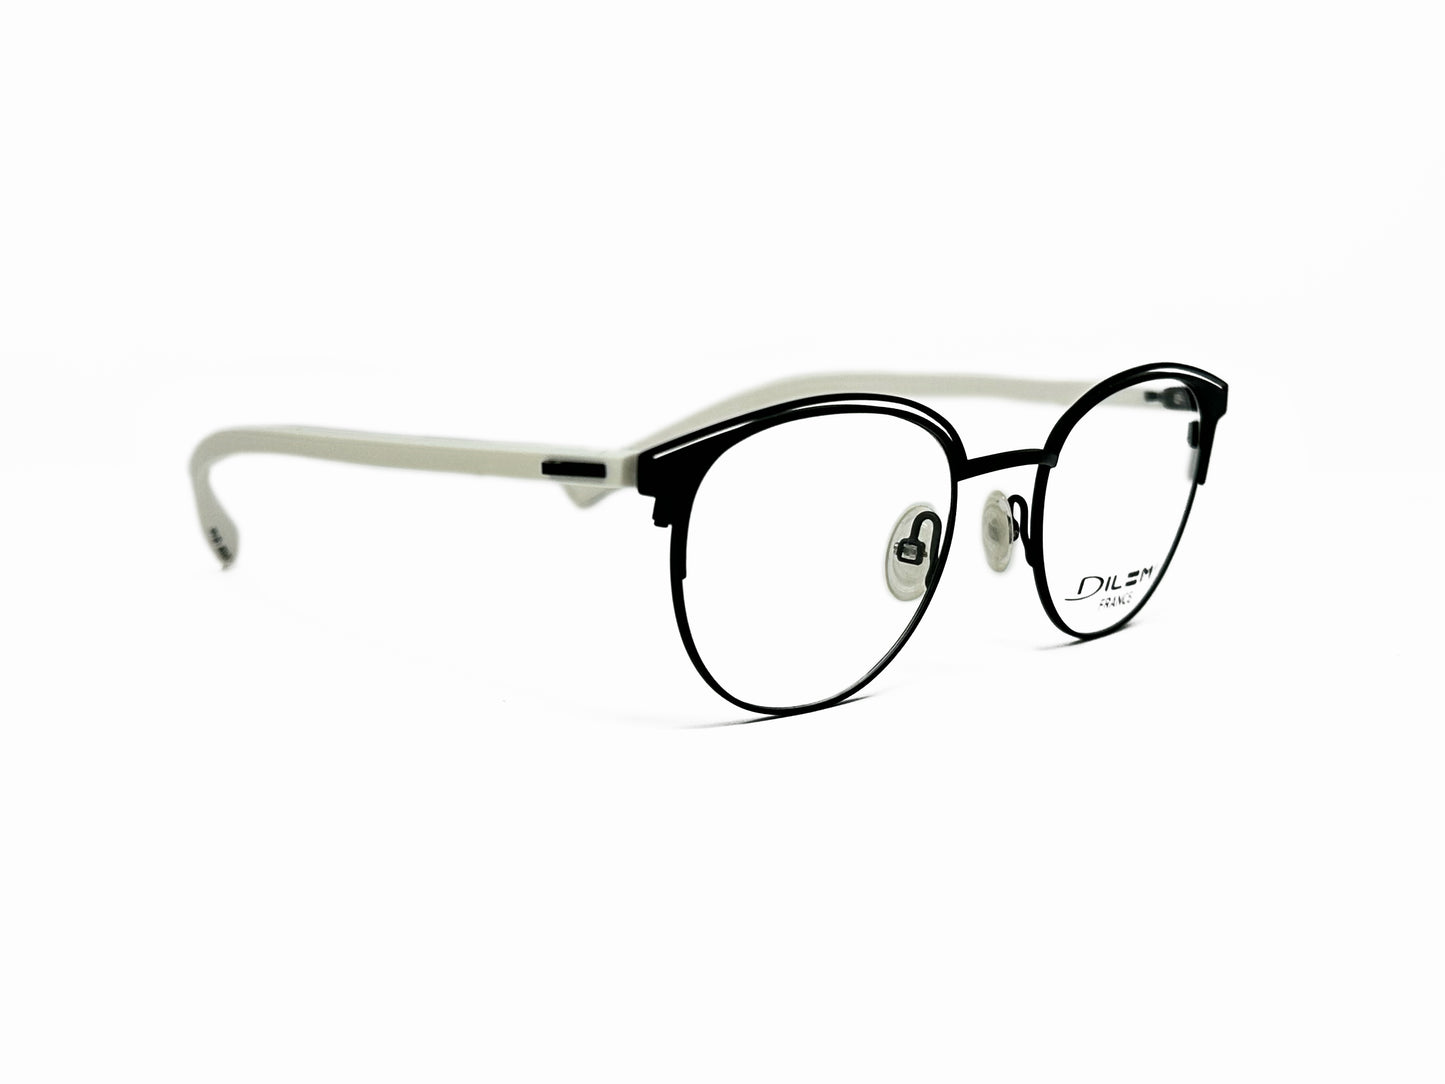 Dilem round optical frame with eing tips and slit cut-out at top of frame. Model: XF009. Color : TKB13 - Black with white temples. Side view.